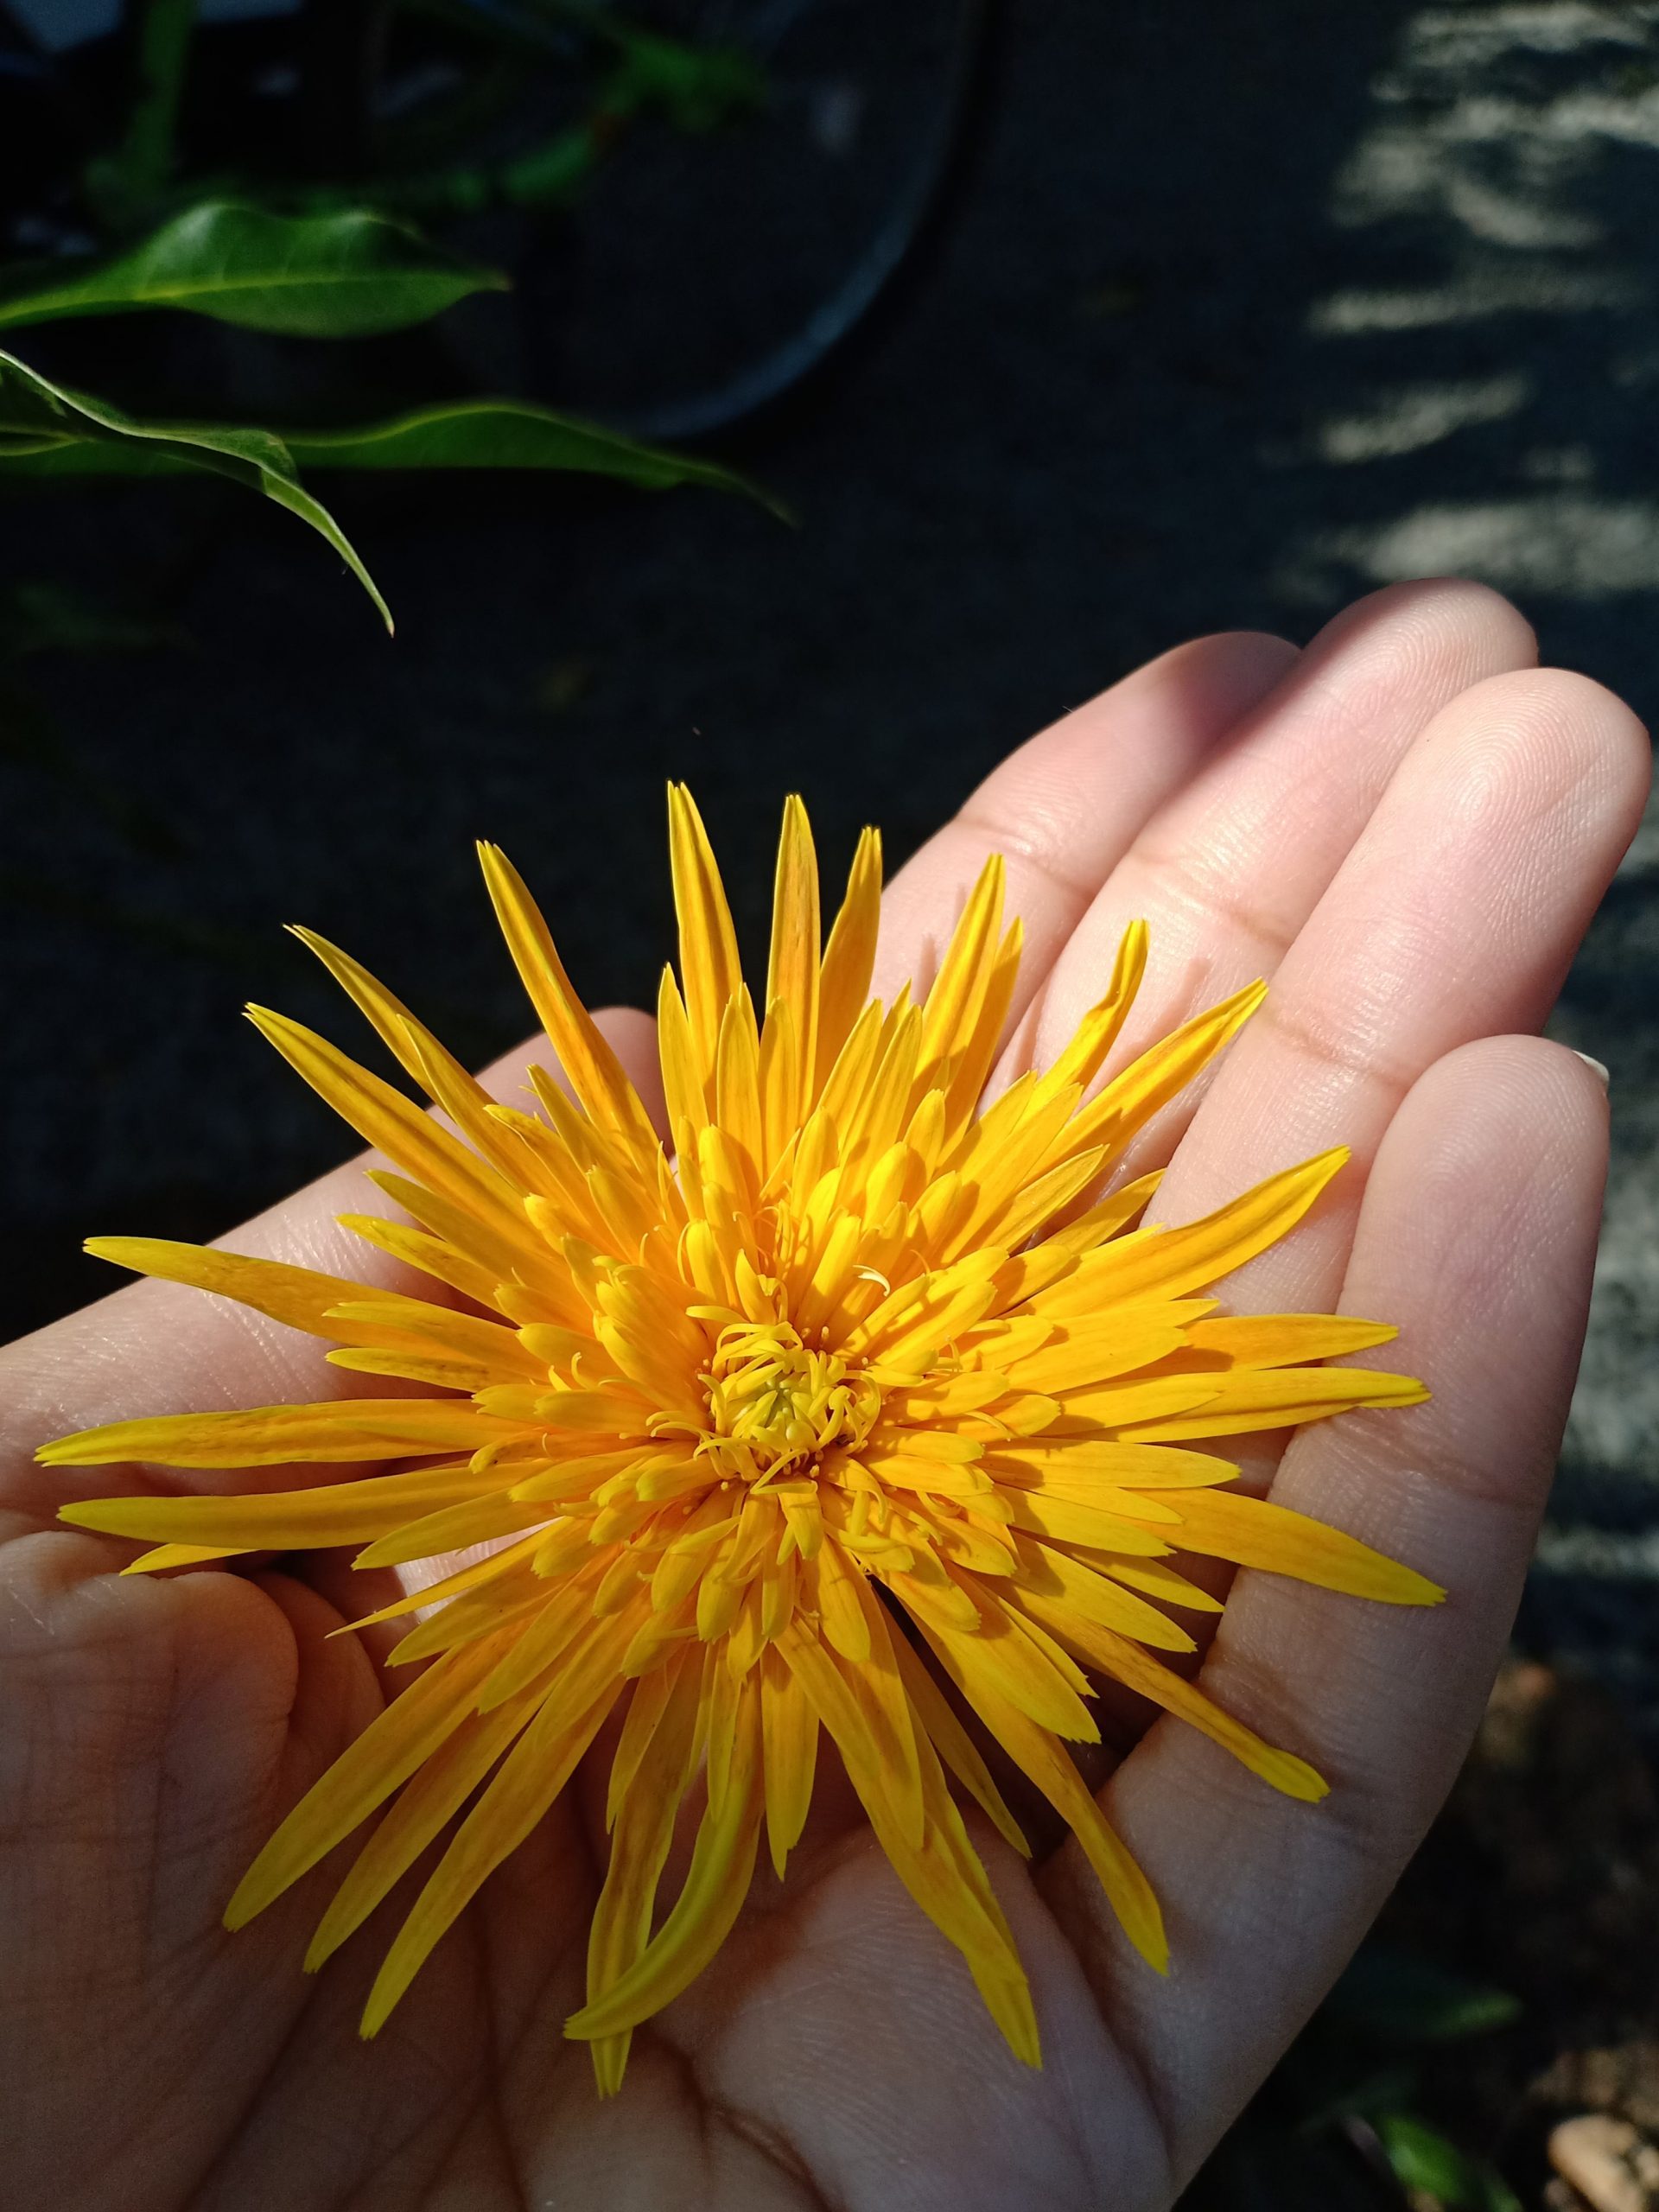 A flower in hand